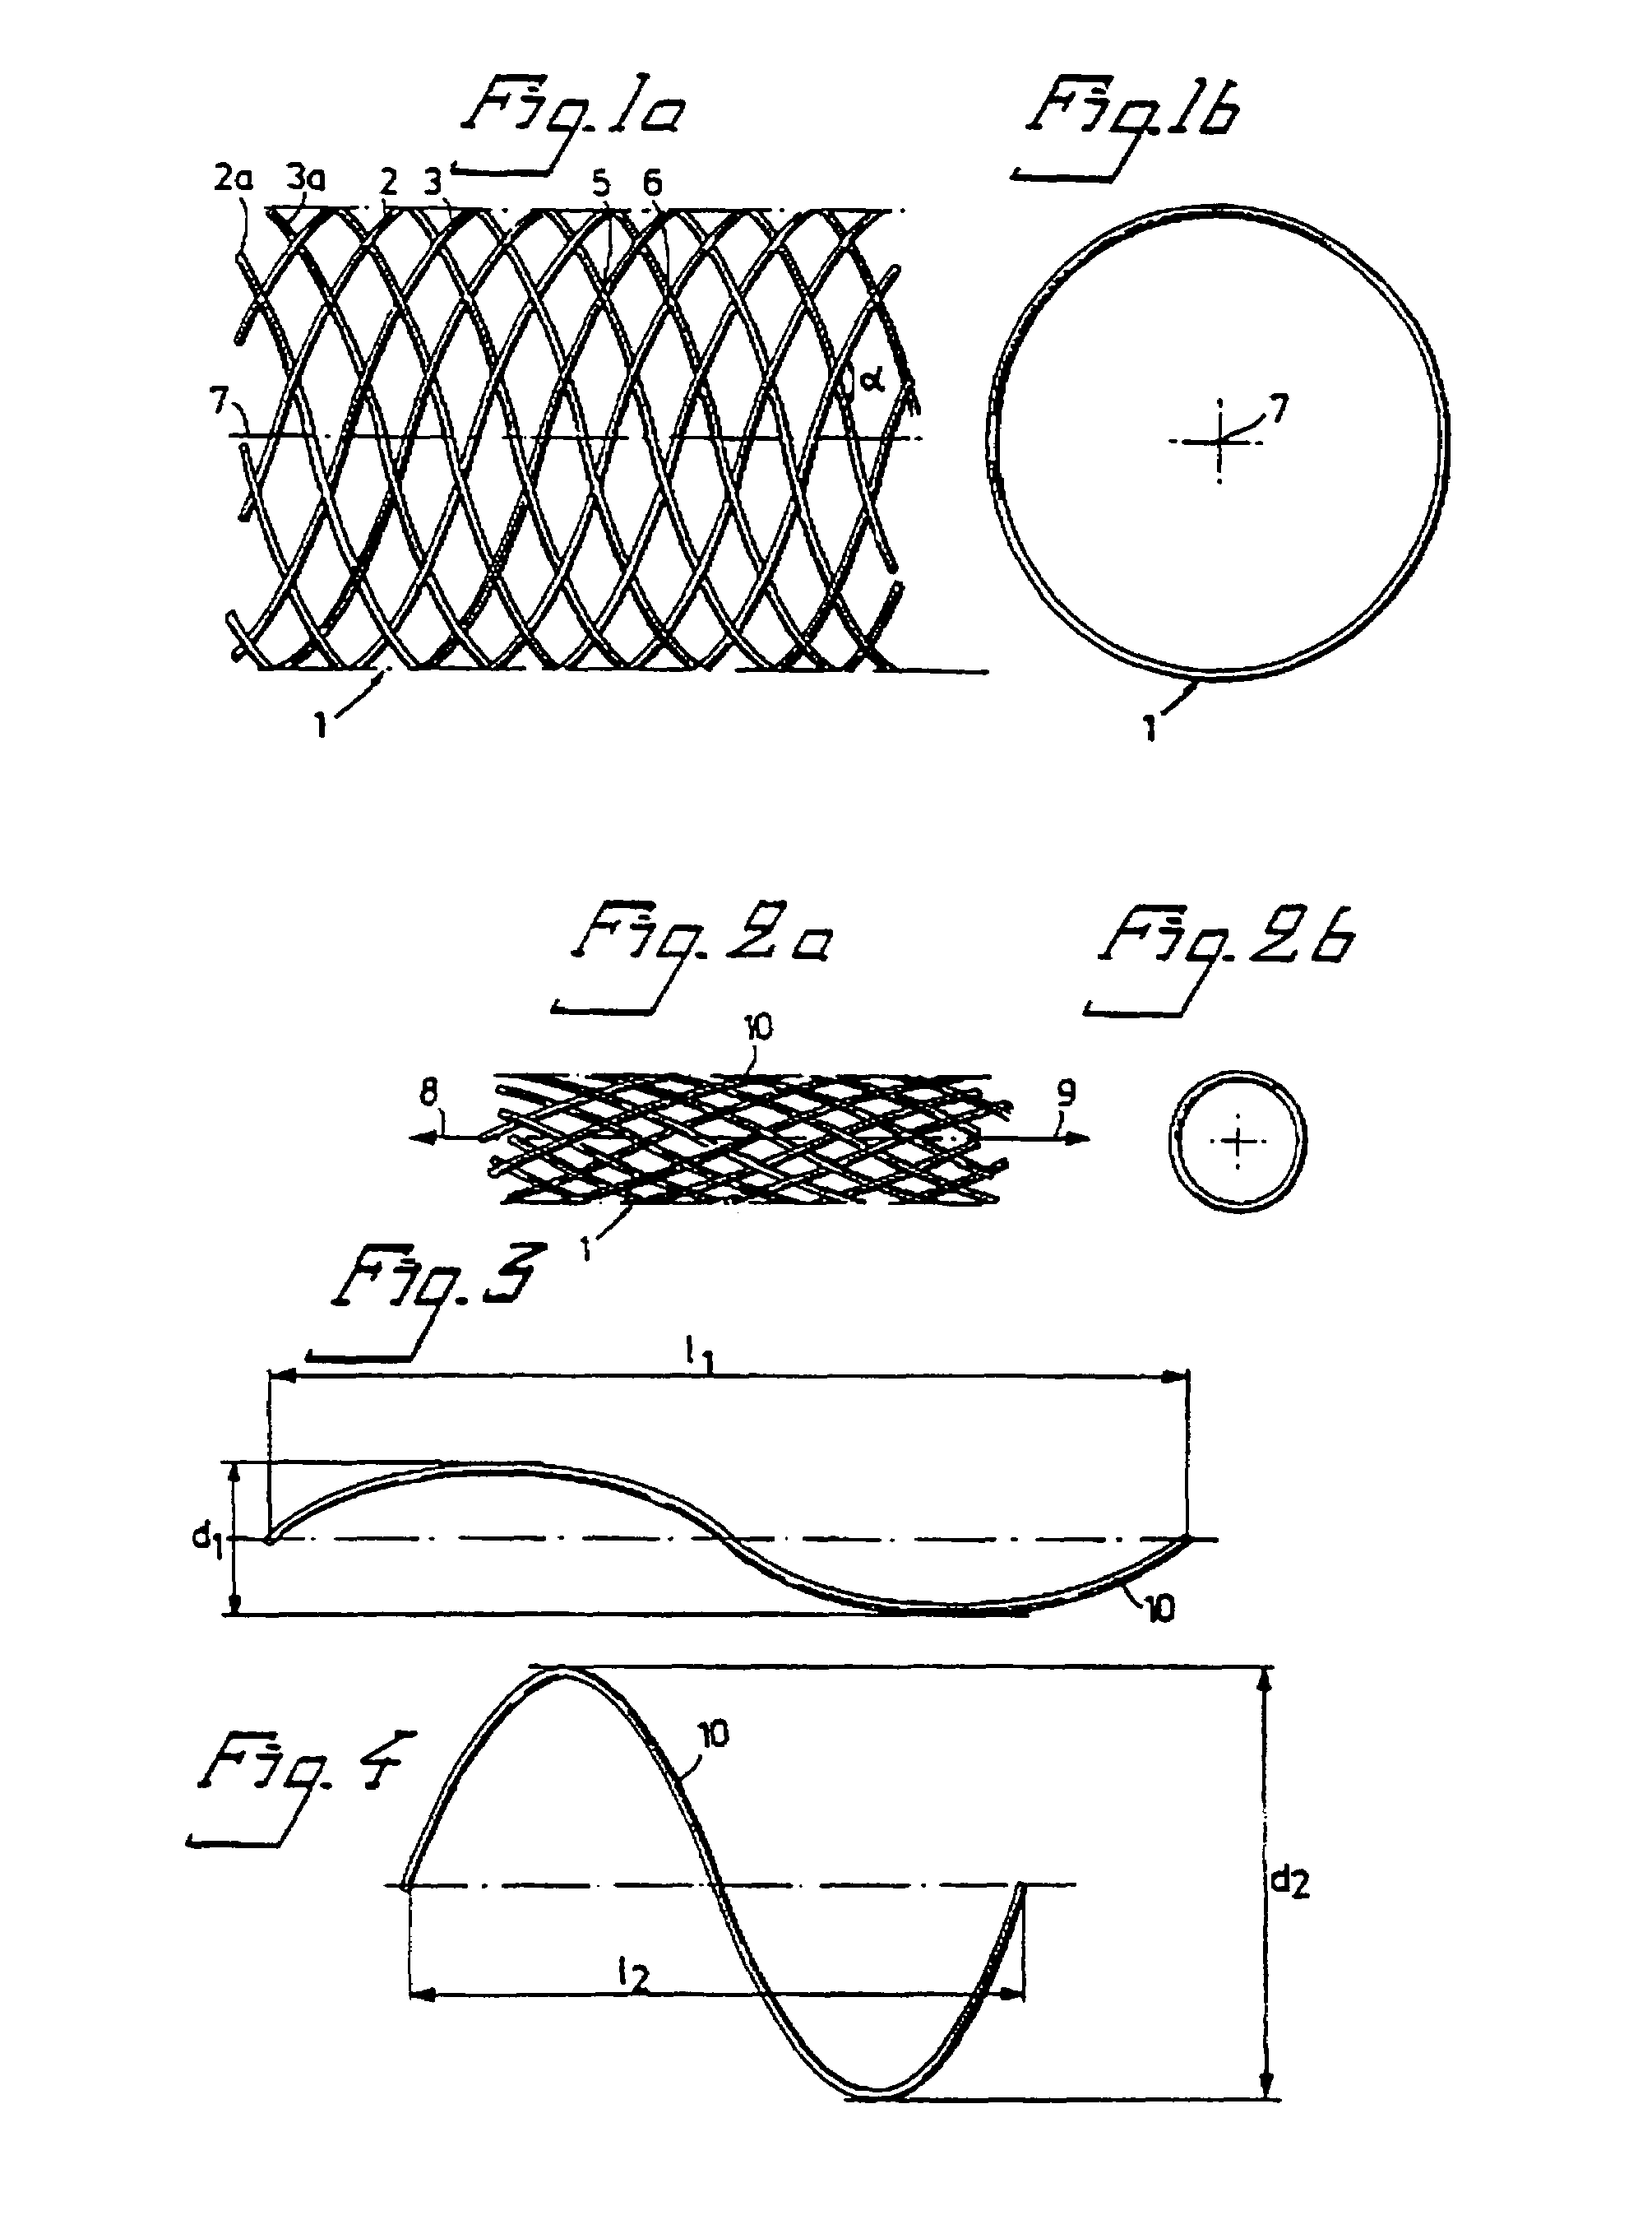 Thermally pliable and carbon fiber stents